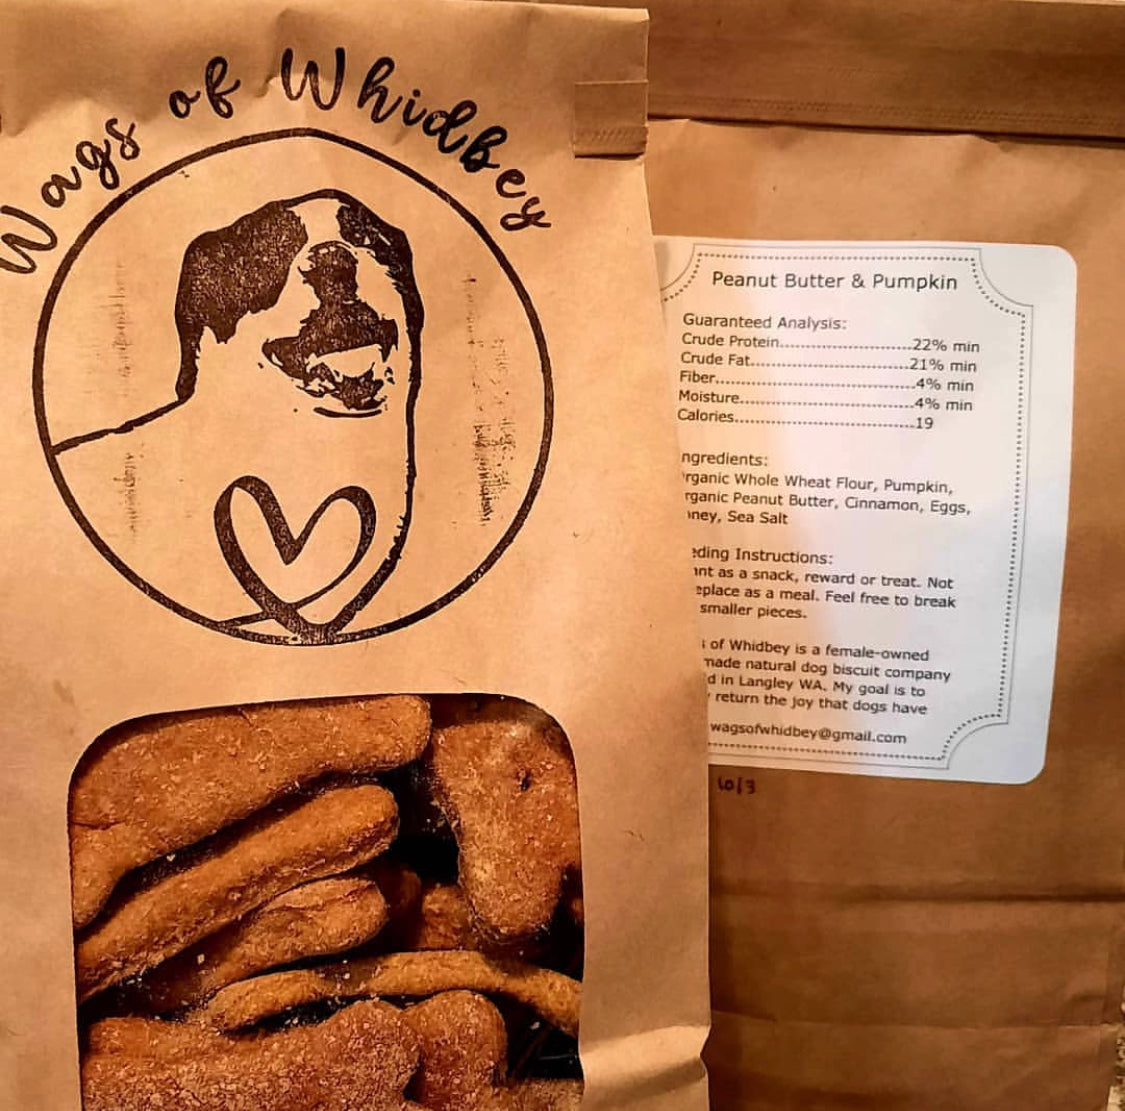 Wags of Whidbey dog treat bags, one facing front and one showing the label on the back.